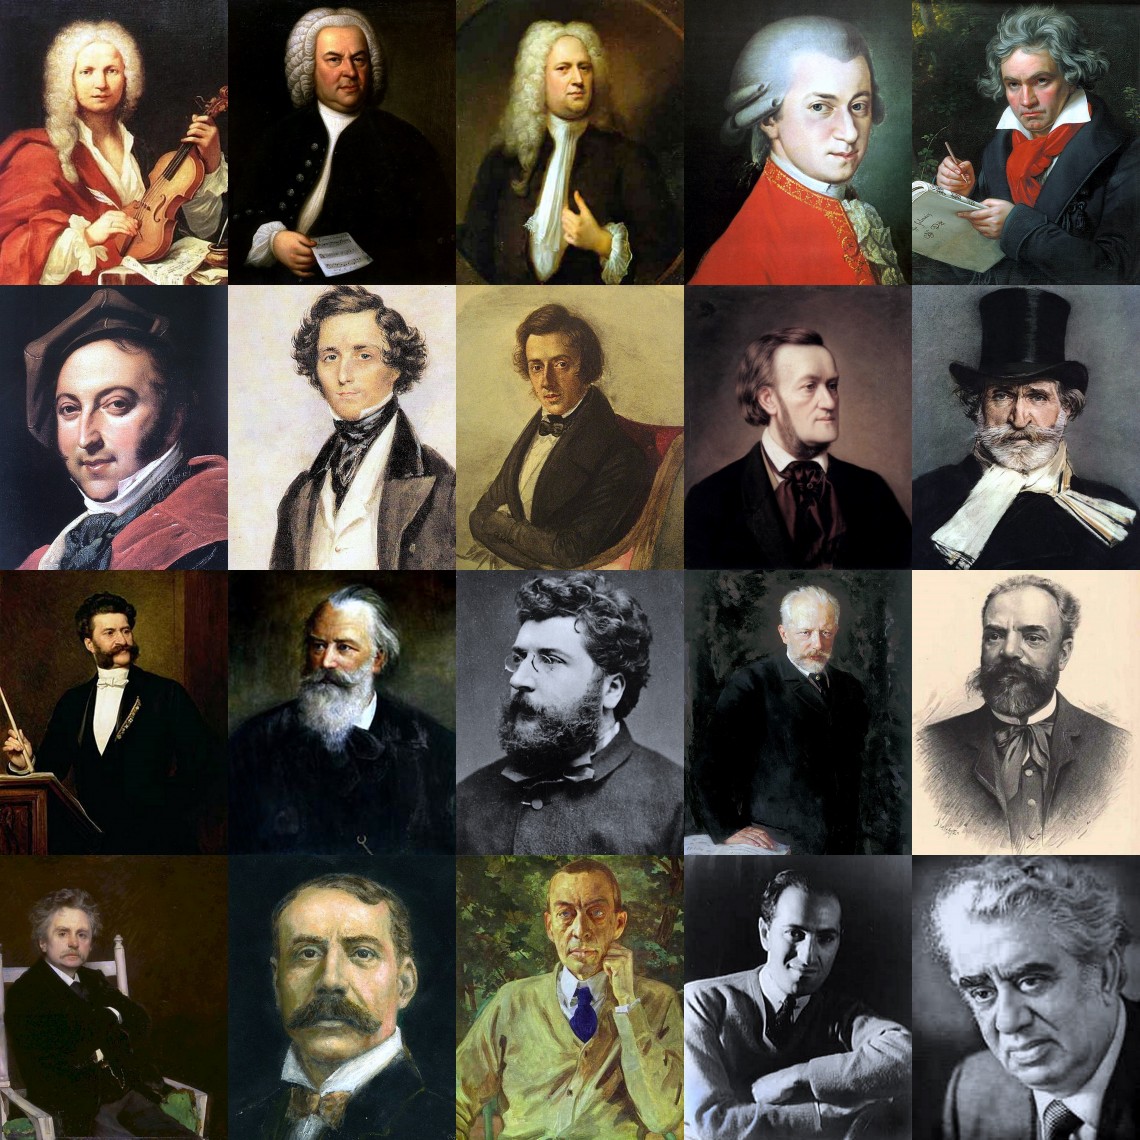 Top 10 most influential composers [*UPDATED*]